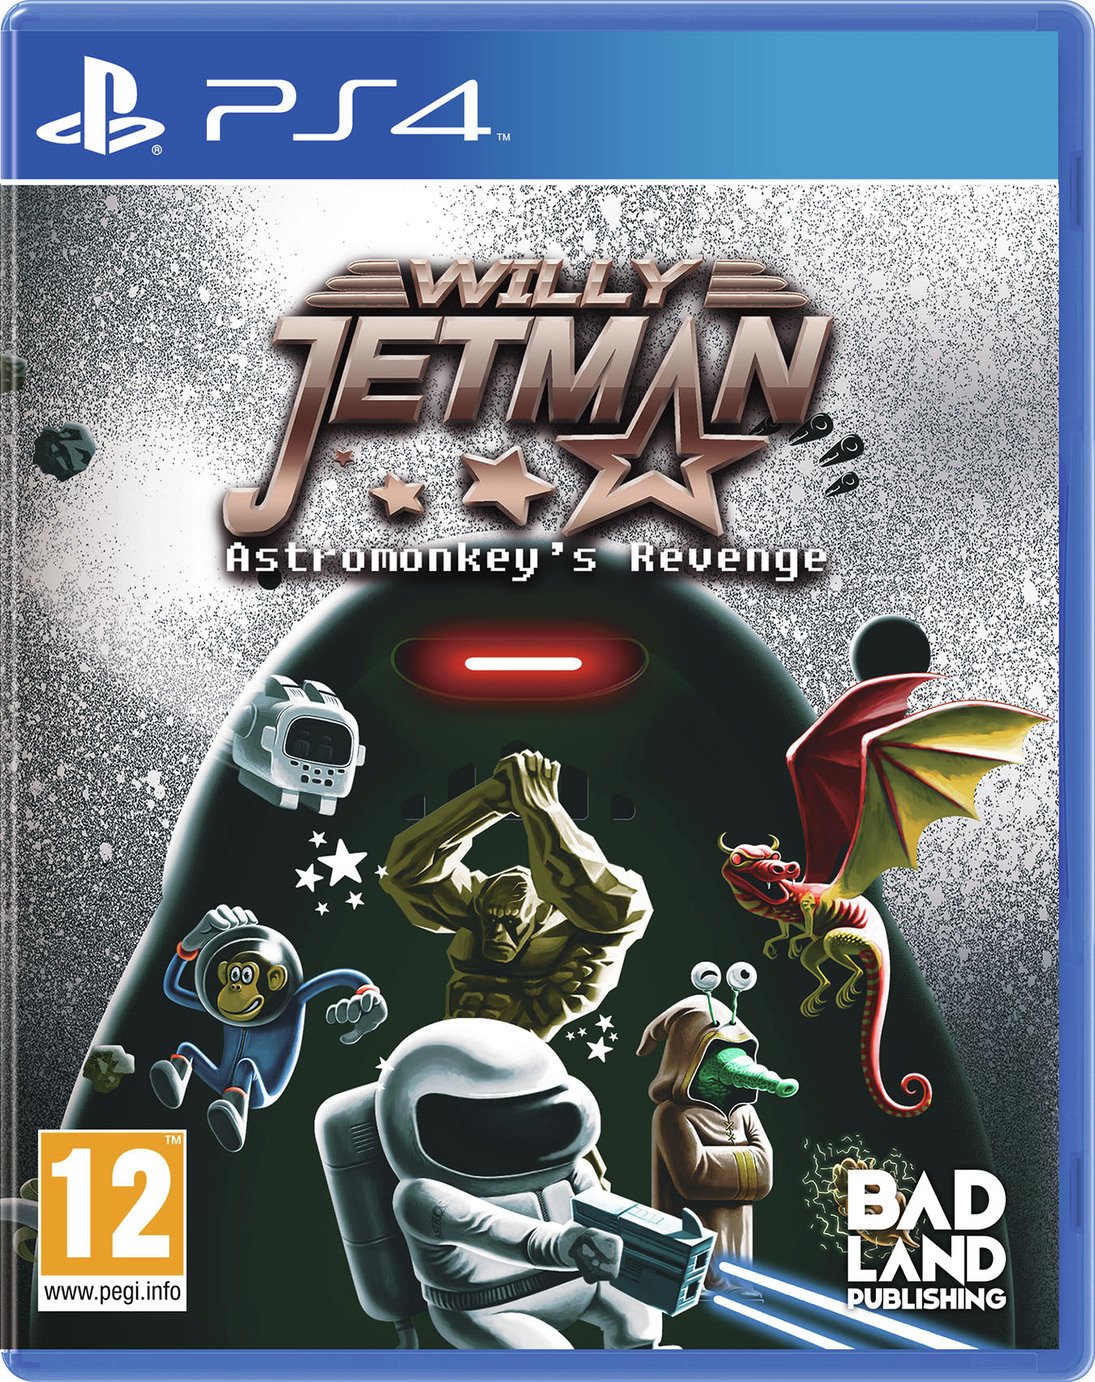 Willy Jetman: Astromonkey's Revenge PS4 Game Pre-Order Review